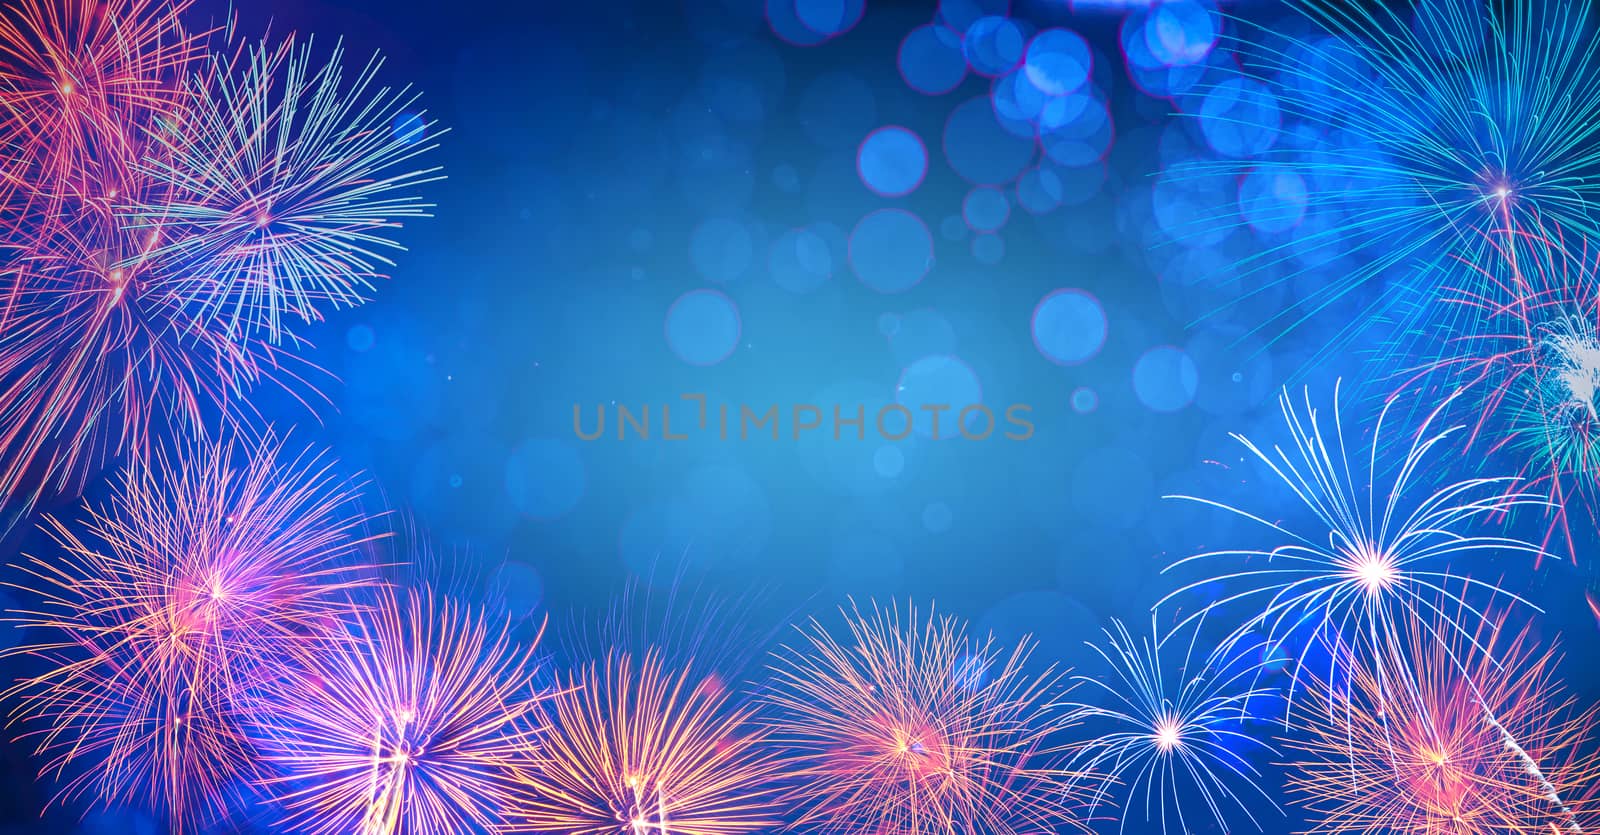 Abstract  Background With Fireworks.Background of new years day celebration Many colorful